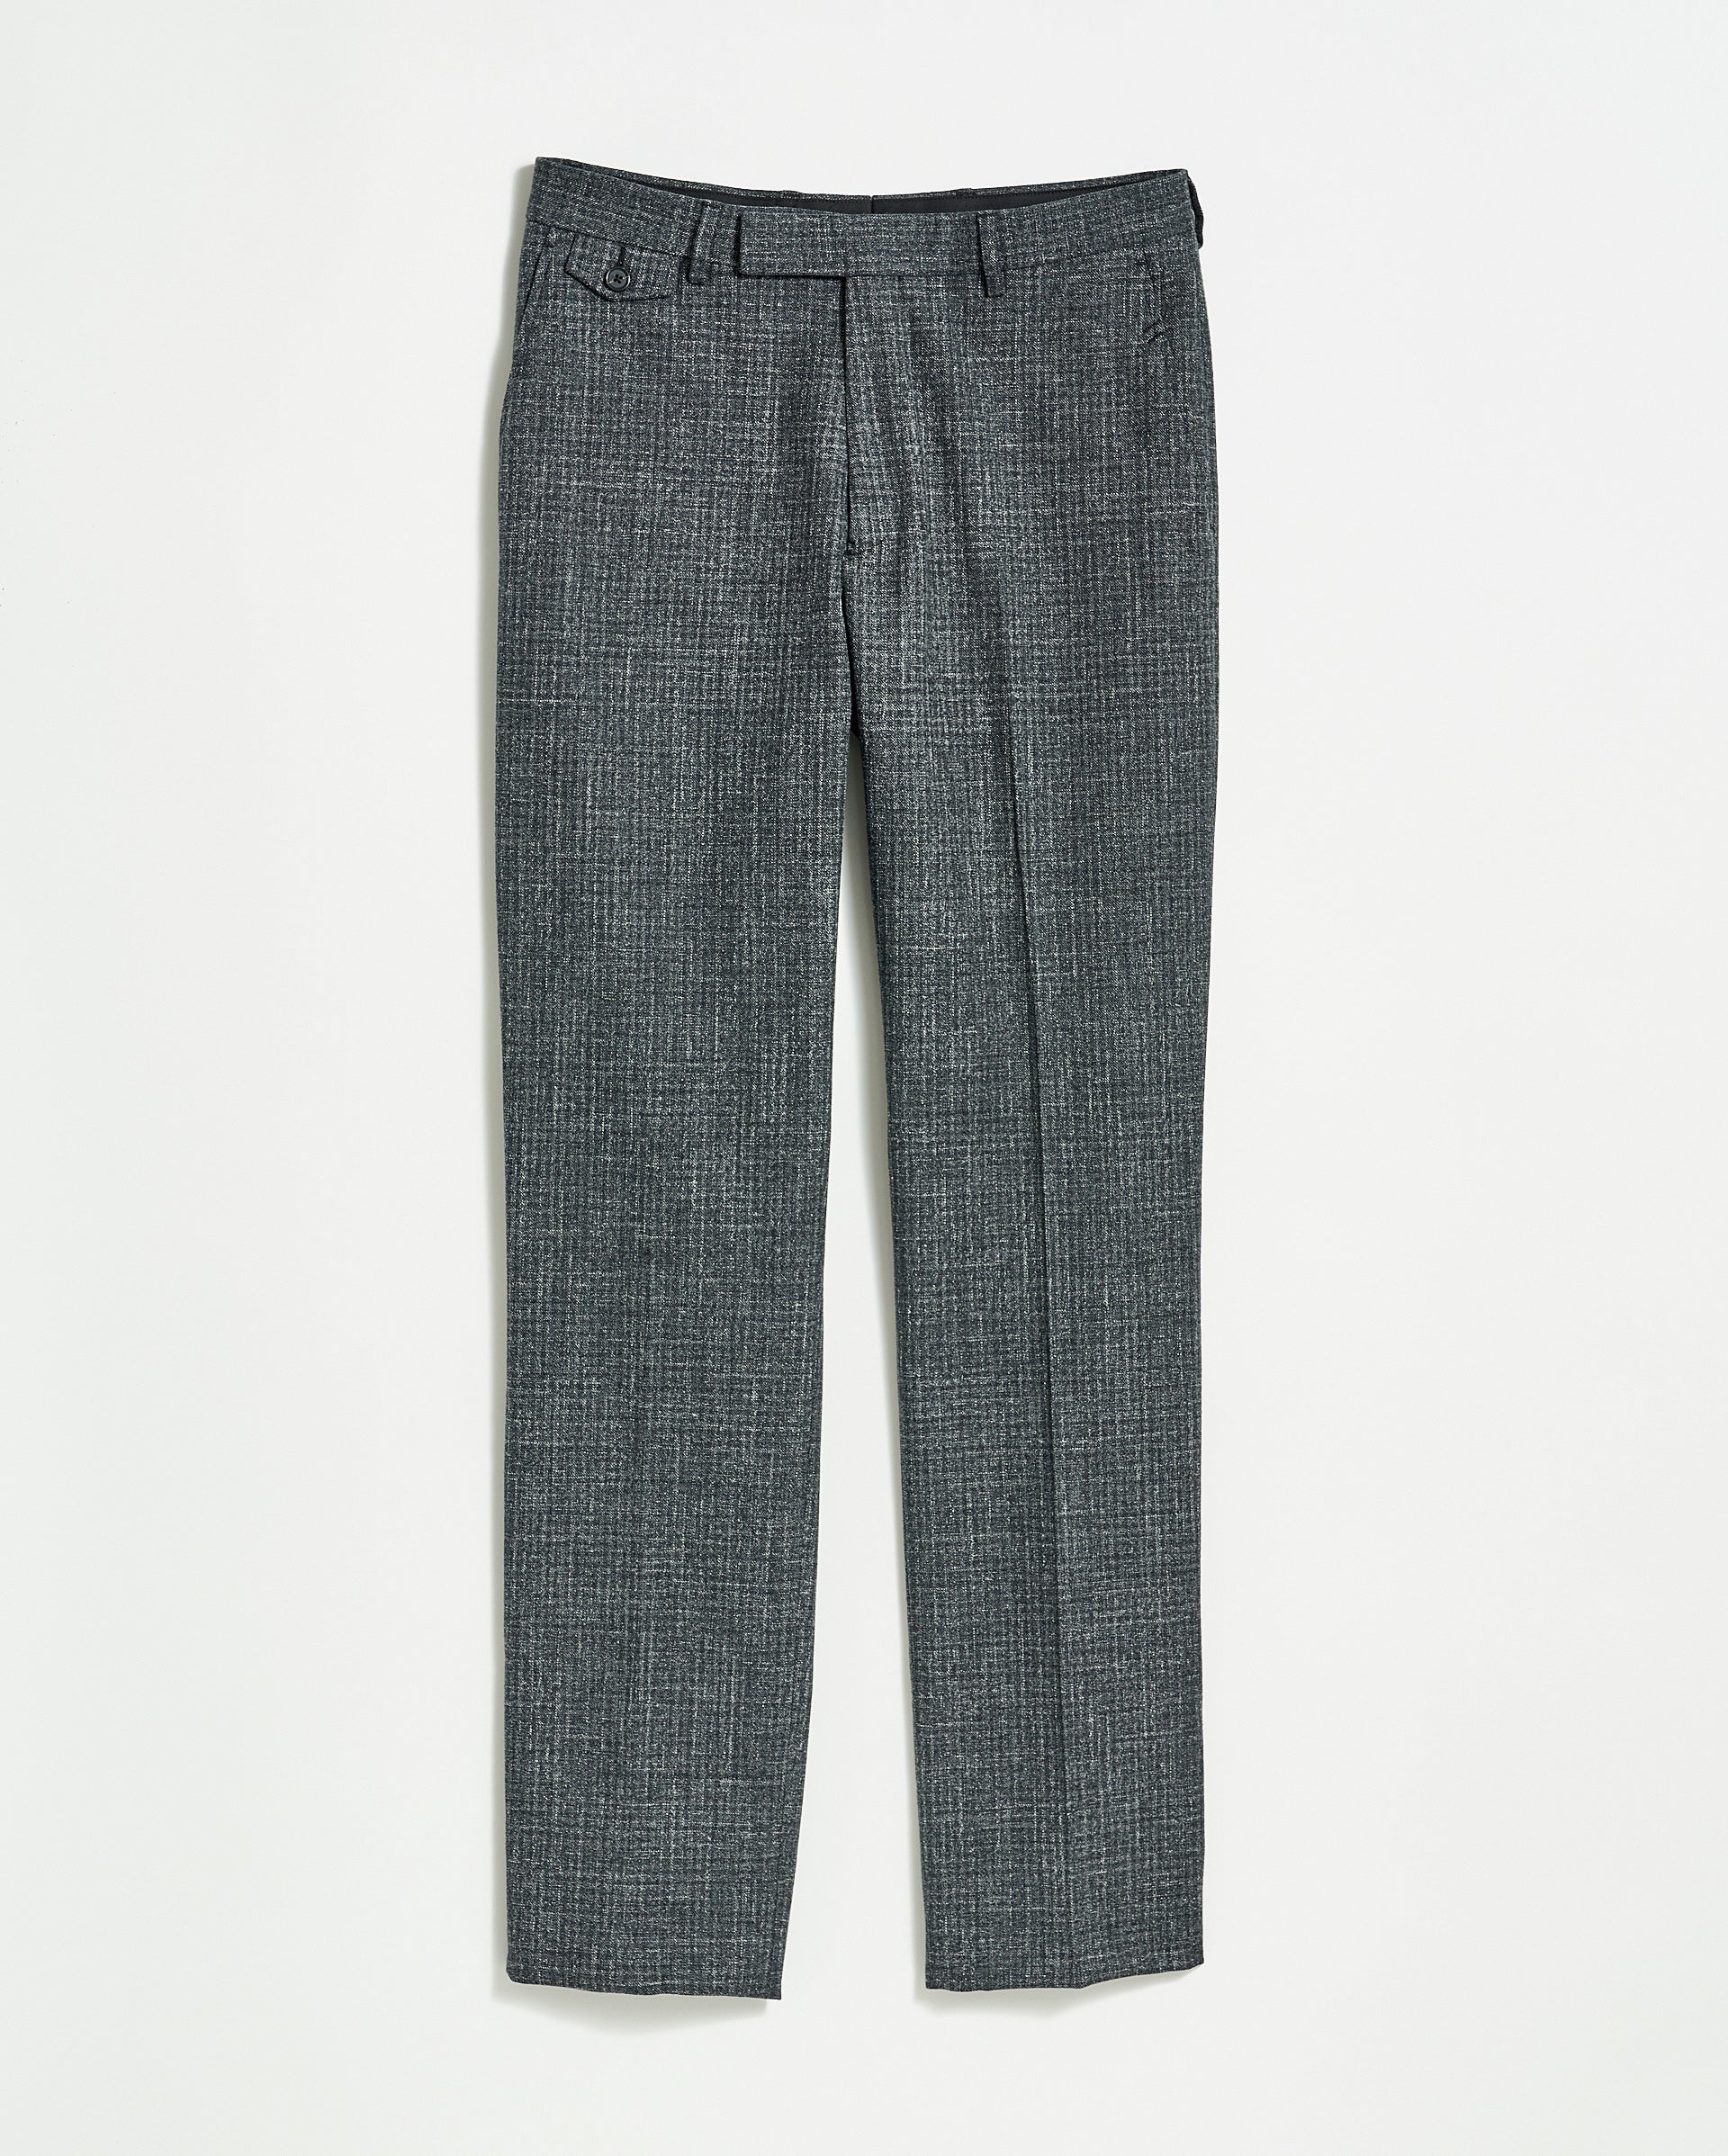 FLAT FRONT TROUSER IN CHARCOAL CHECK – Billy Reid